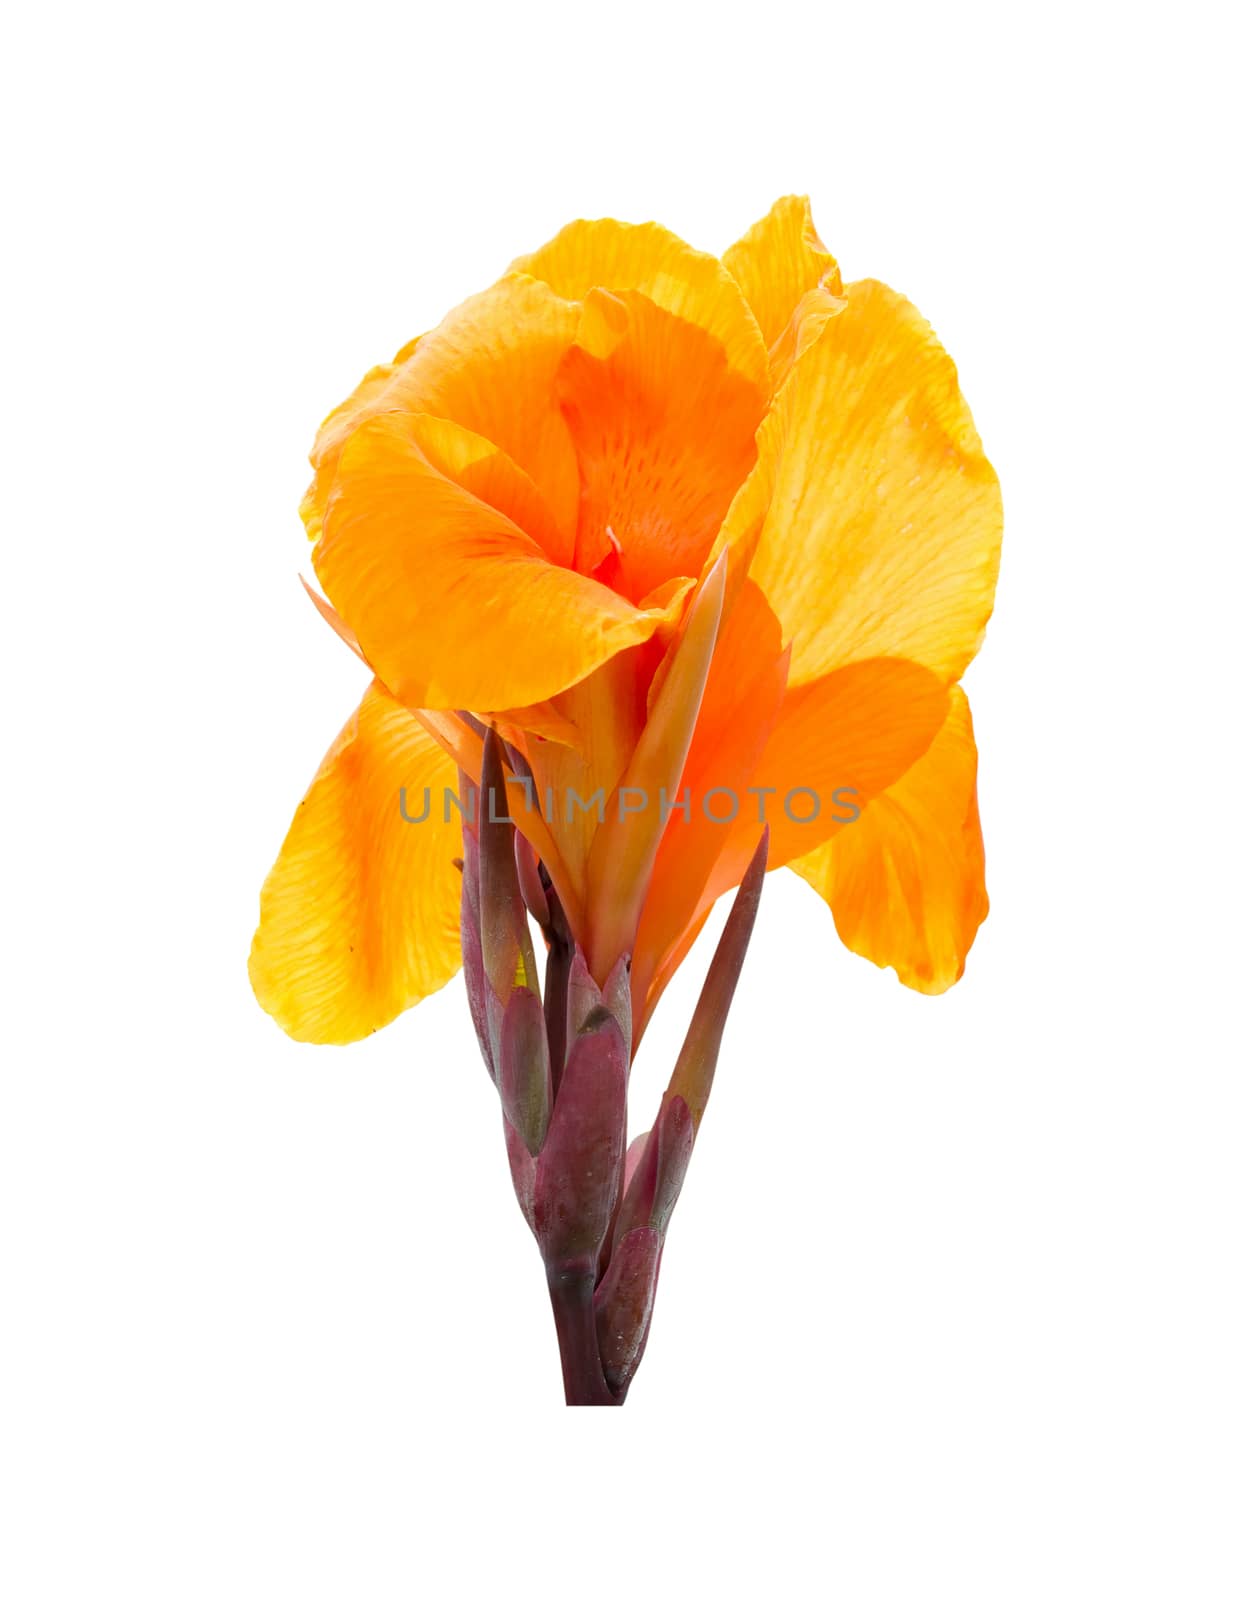 Orange canna lily flowers on white background. Clipping path by Kumma